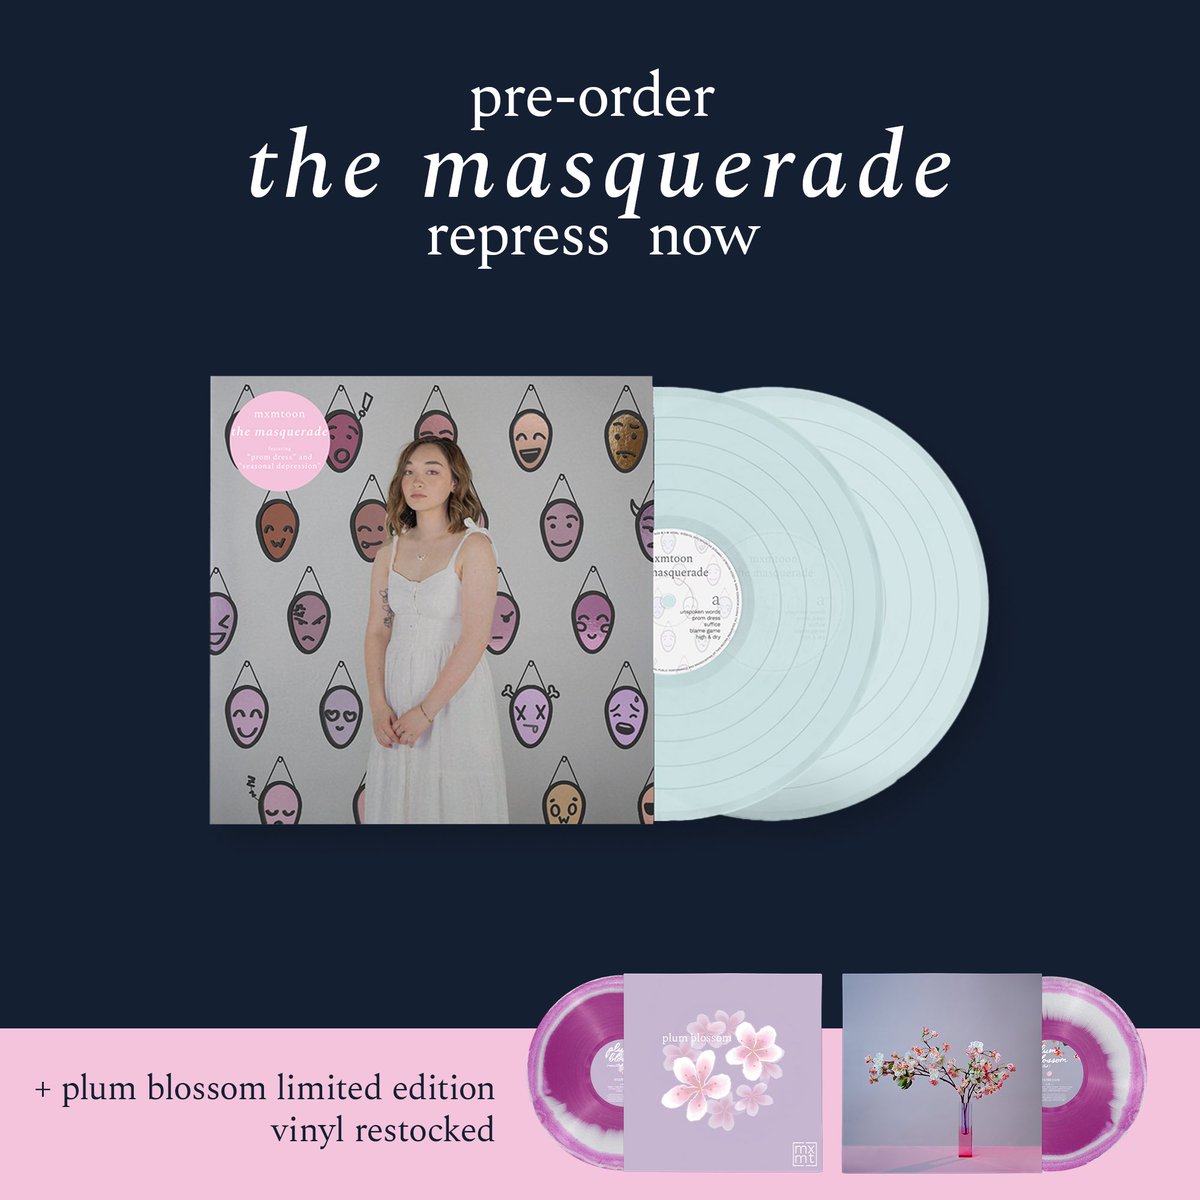 new spring line just dropped and my vinyl repress of the masquerade is available for pre-order now!! 😊 mxmtoon.os.fan